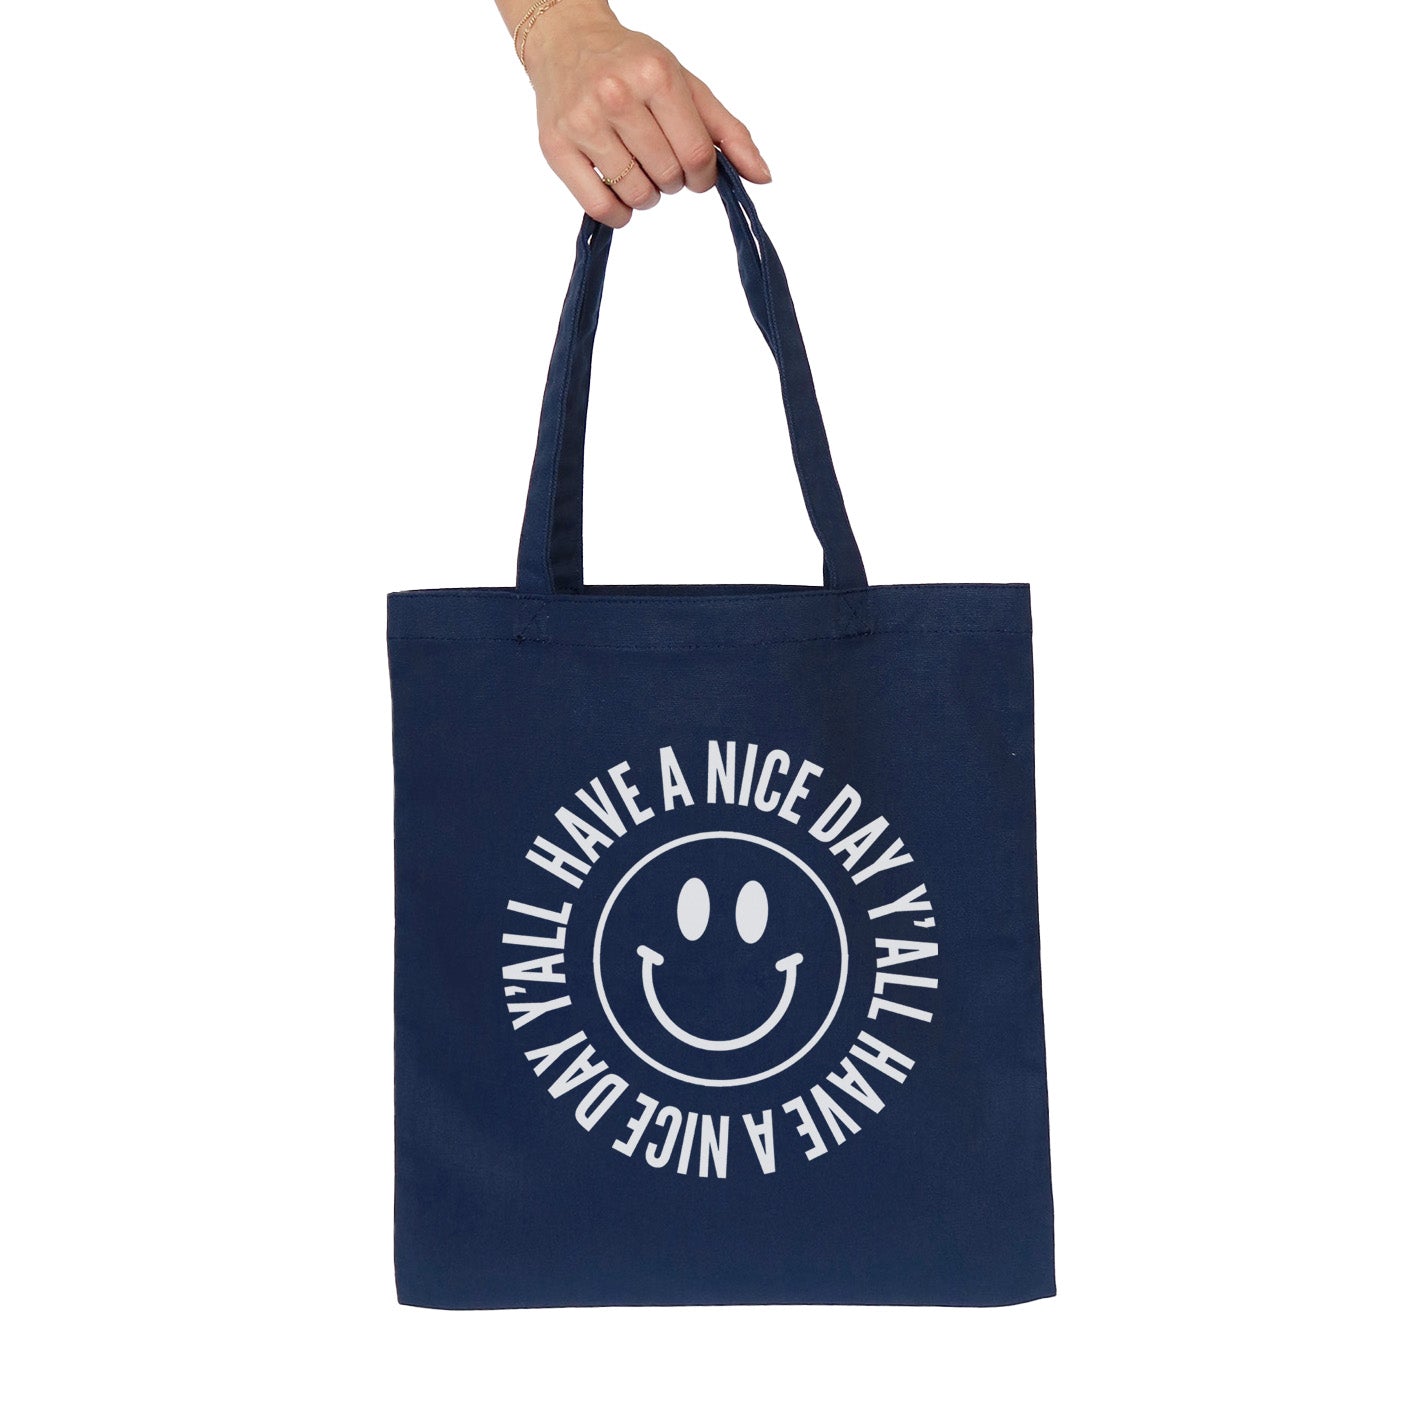 Smile Have a Nice Day Y'all Tote Bag